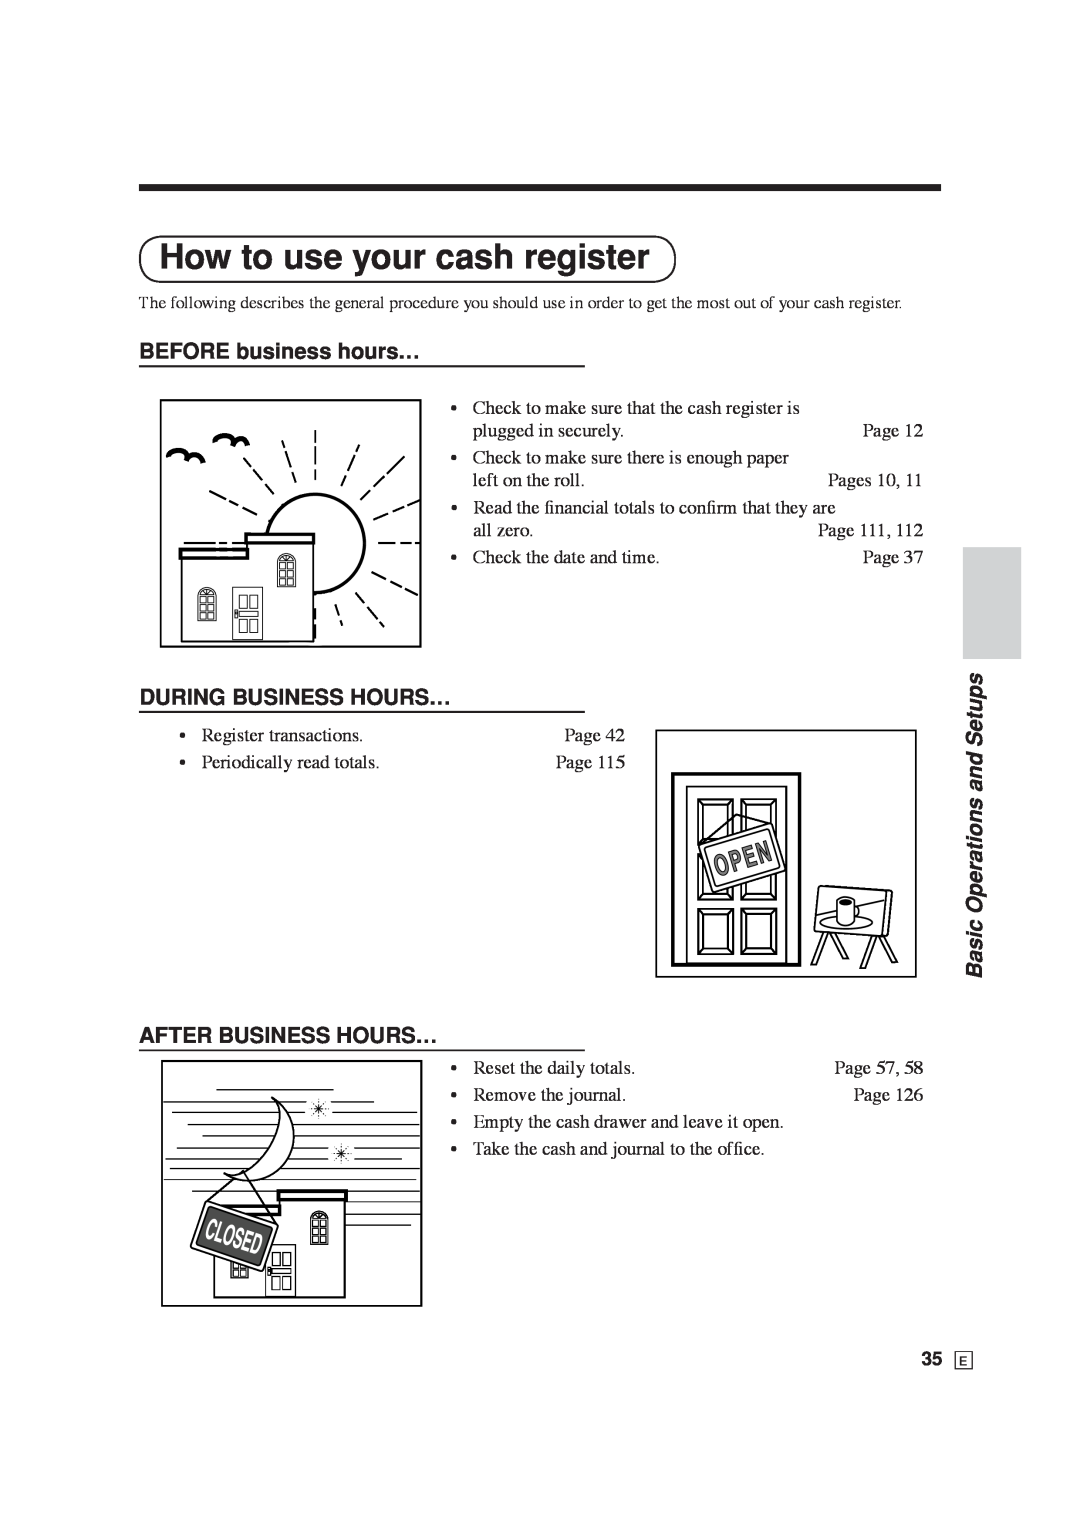 Casio SE-C6000 How to use your cash register, BEFORE business hours…, During Business Hours…, After Business Hours… 